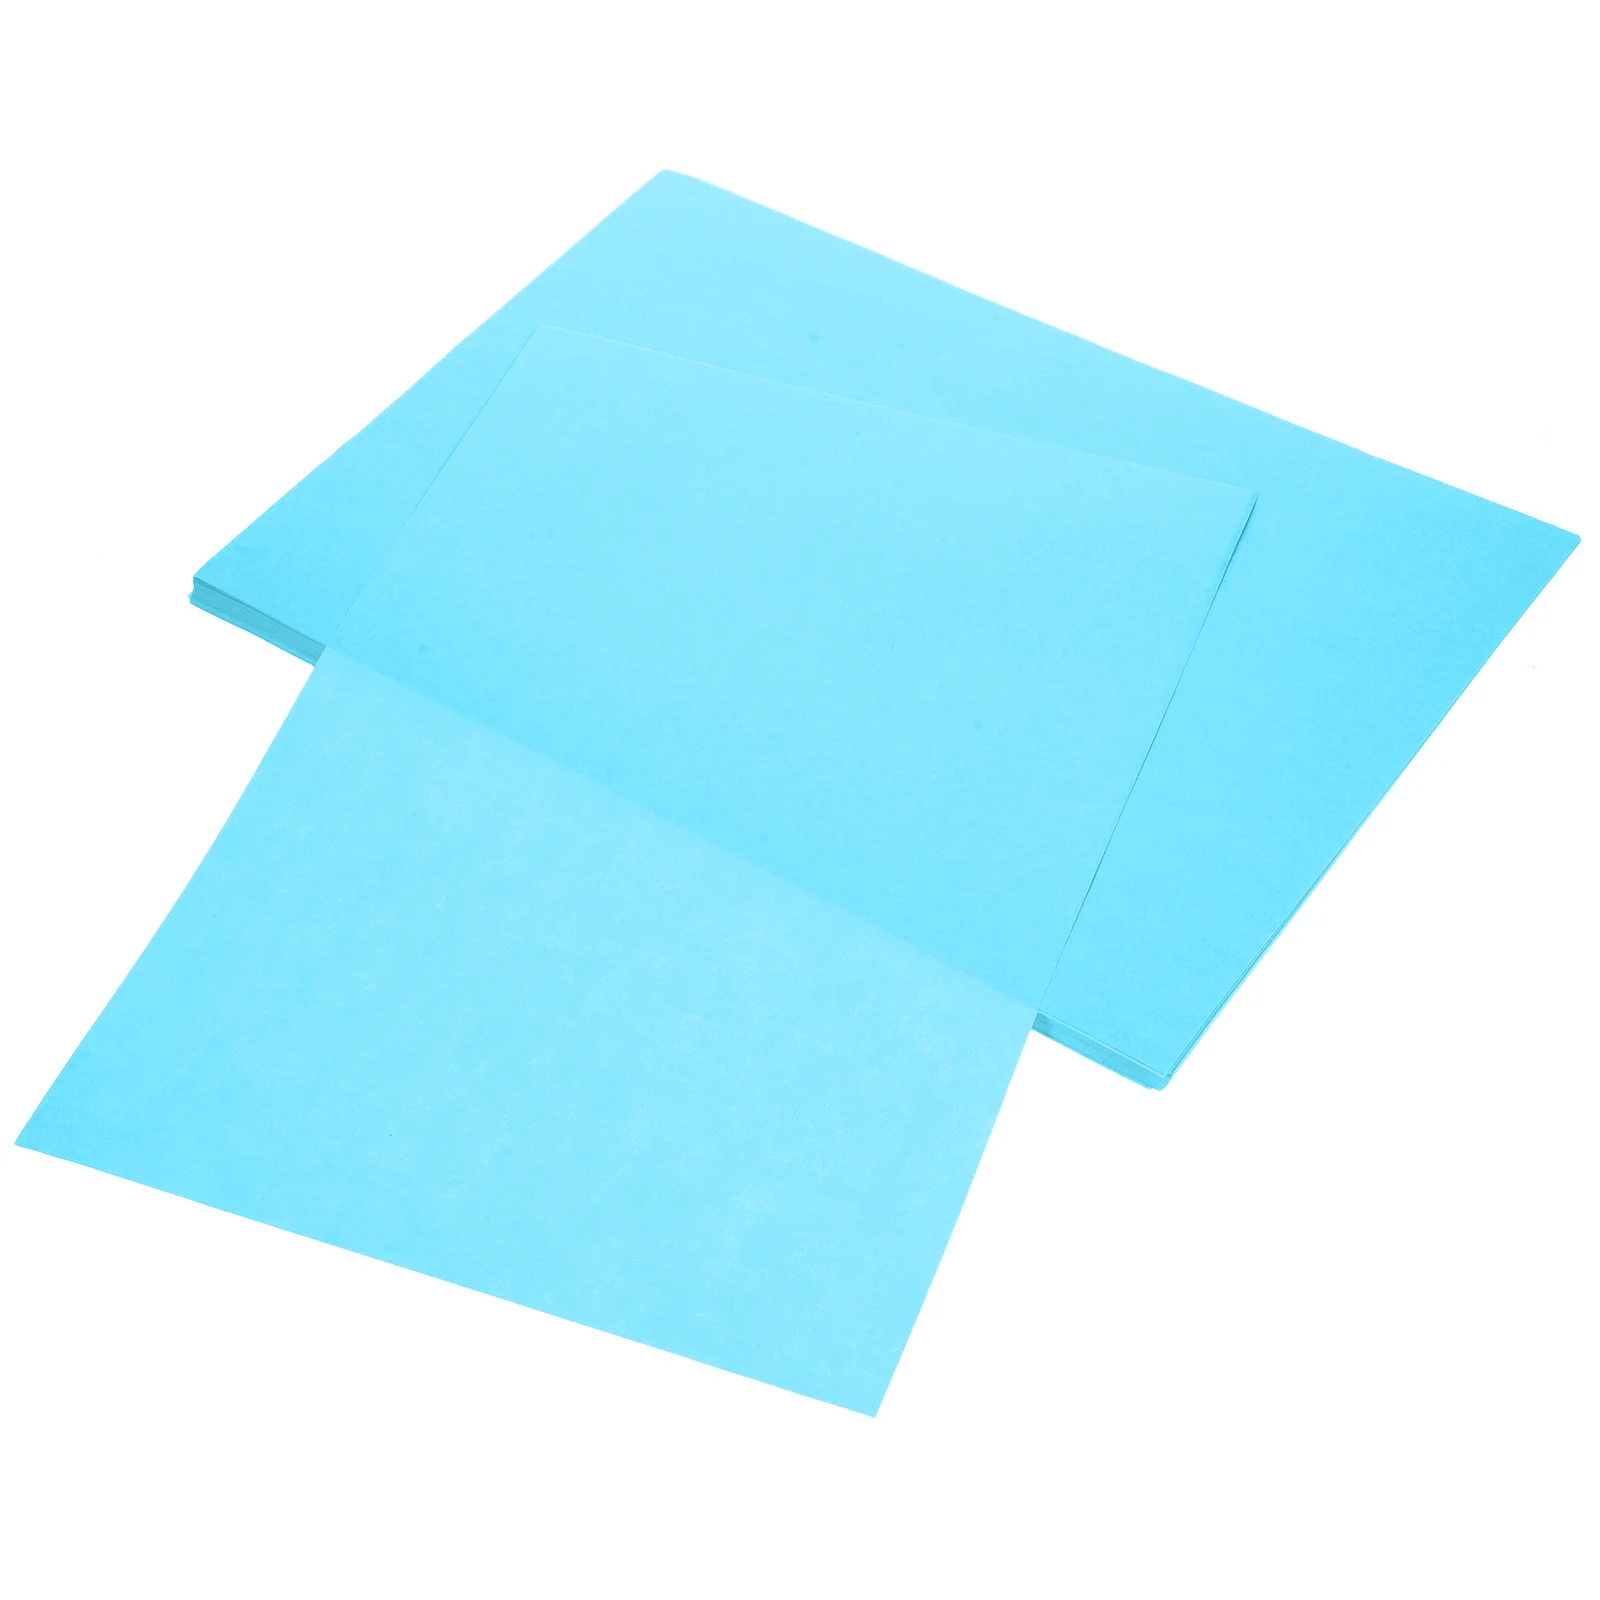 

100 Sheets Paper A4 Blank Printer Printing Clear Cardboard Color Printers Multi-function Thick Origami Writing for